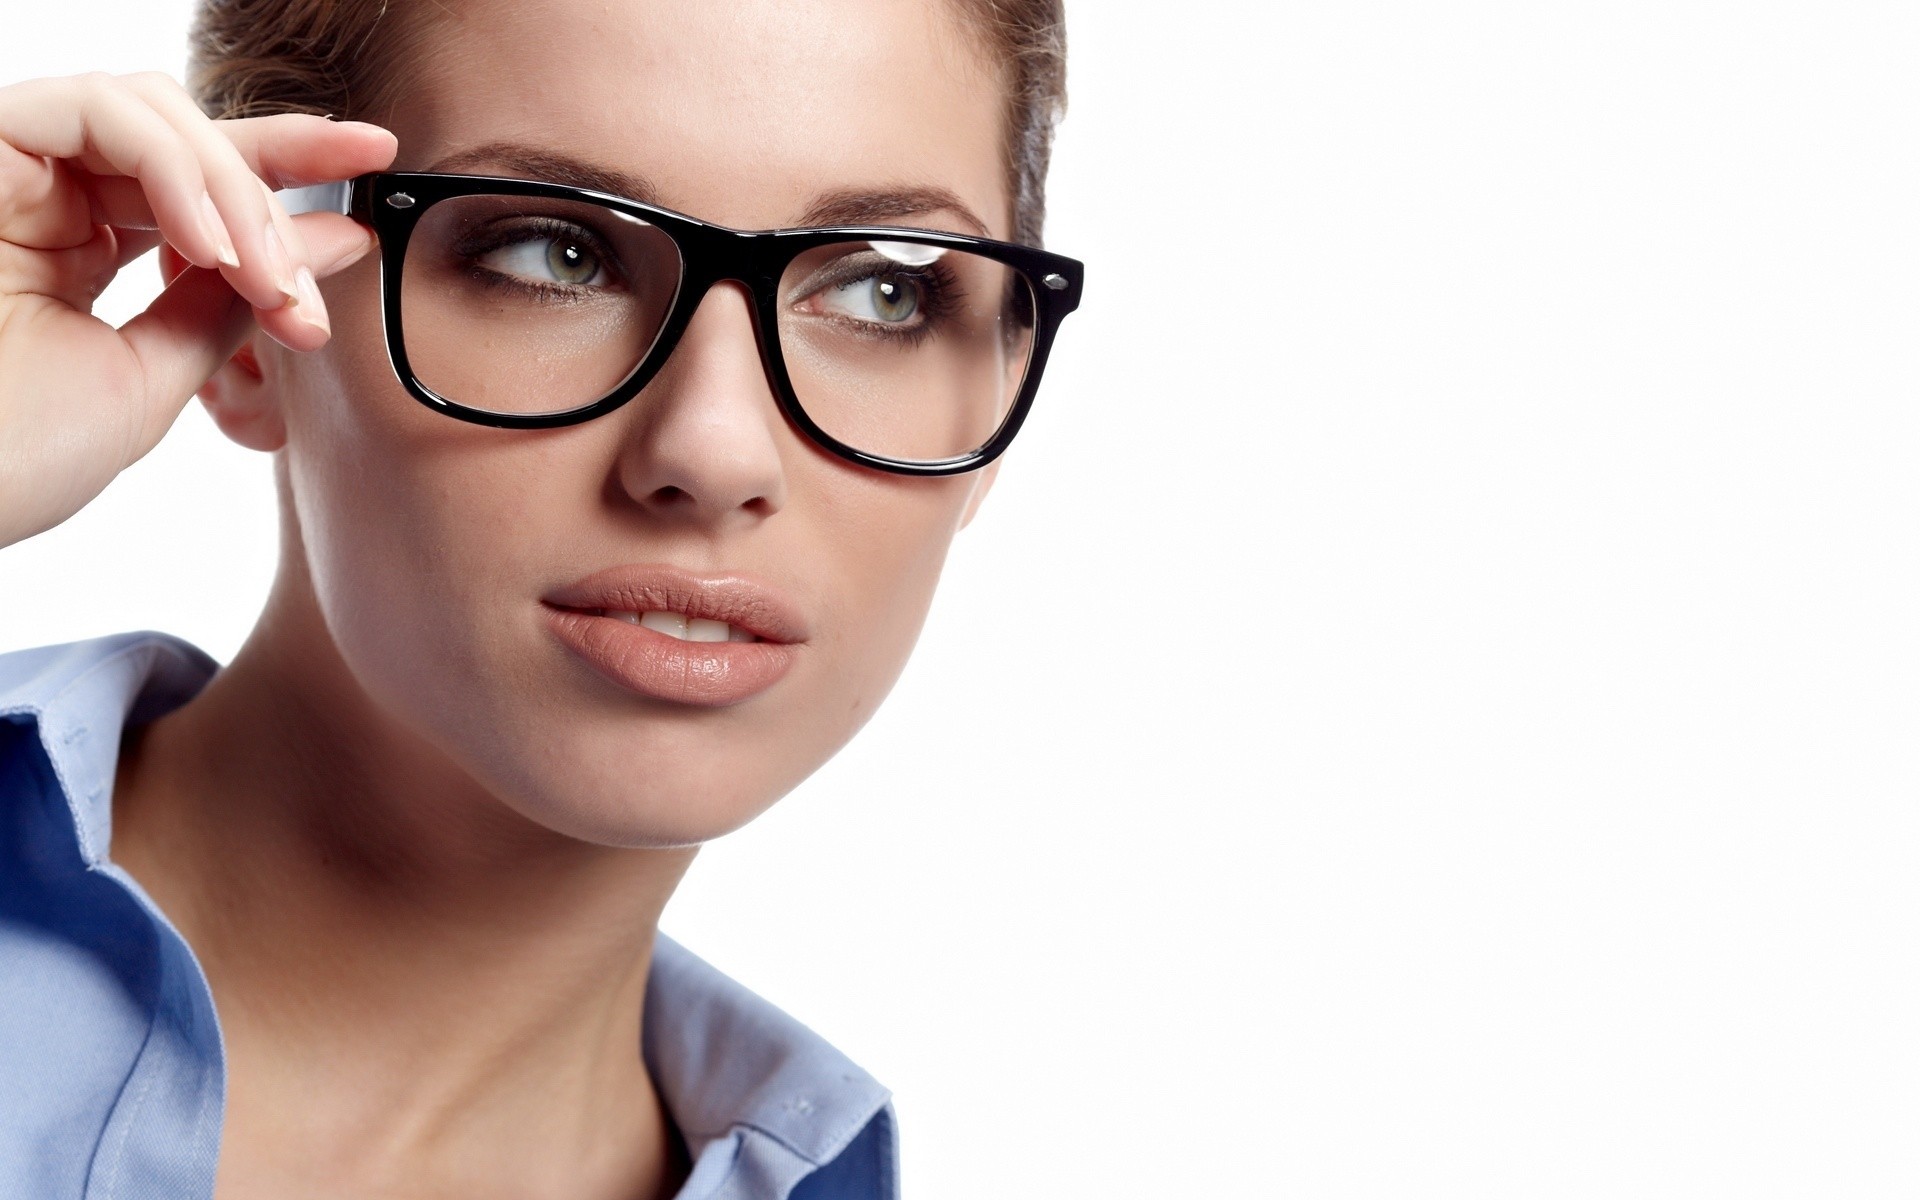 Model Brute Close Up Face Girl Glasses White Woman